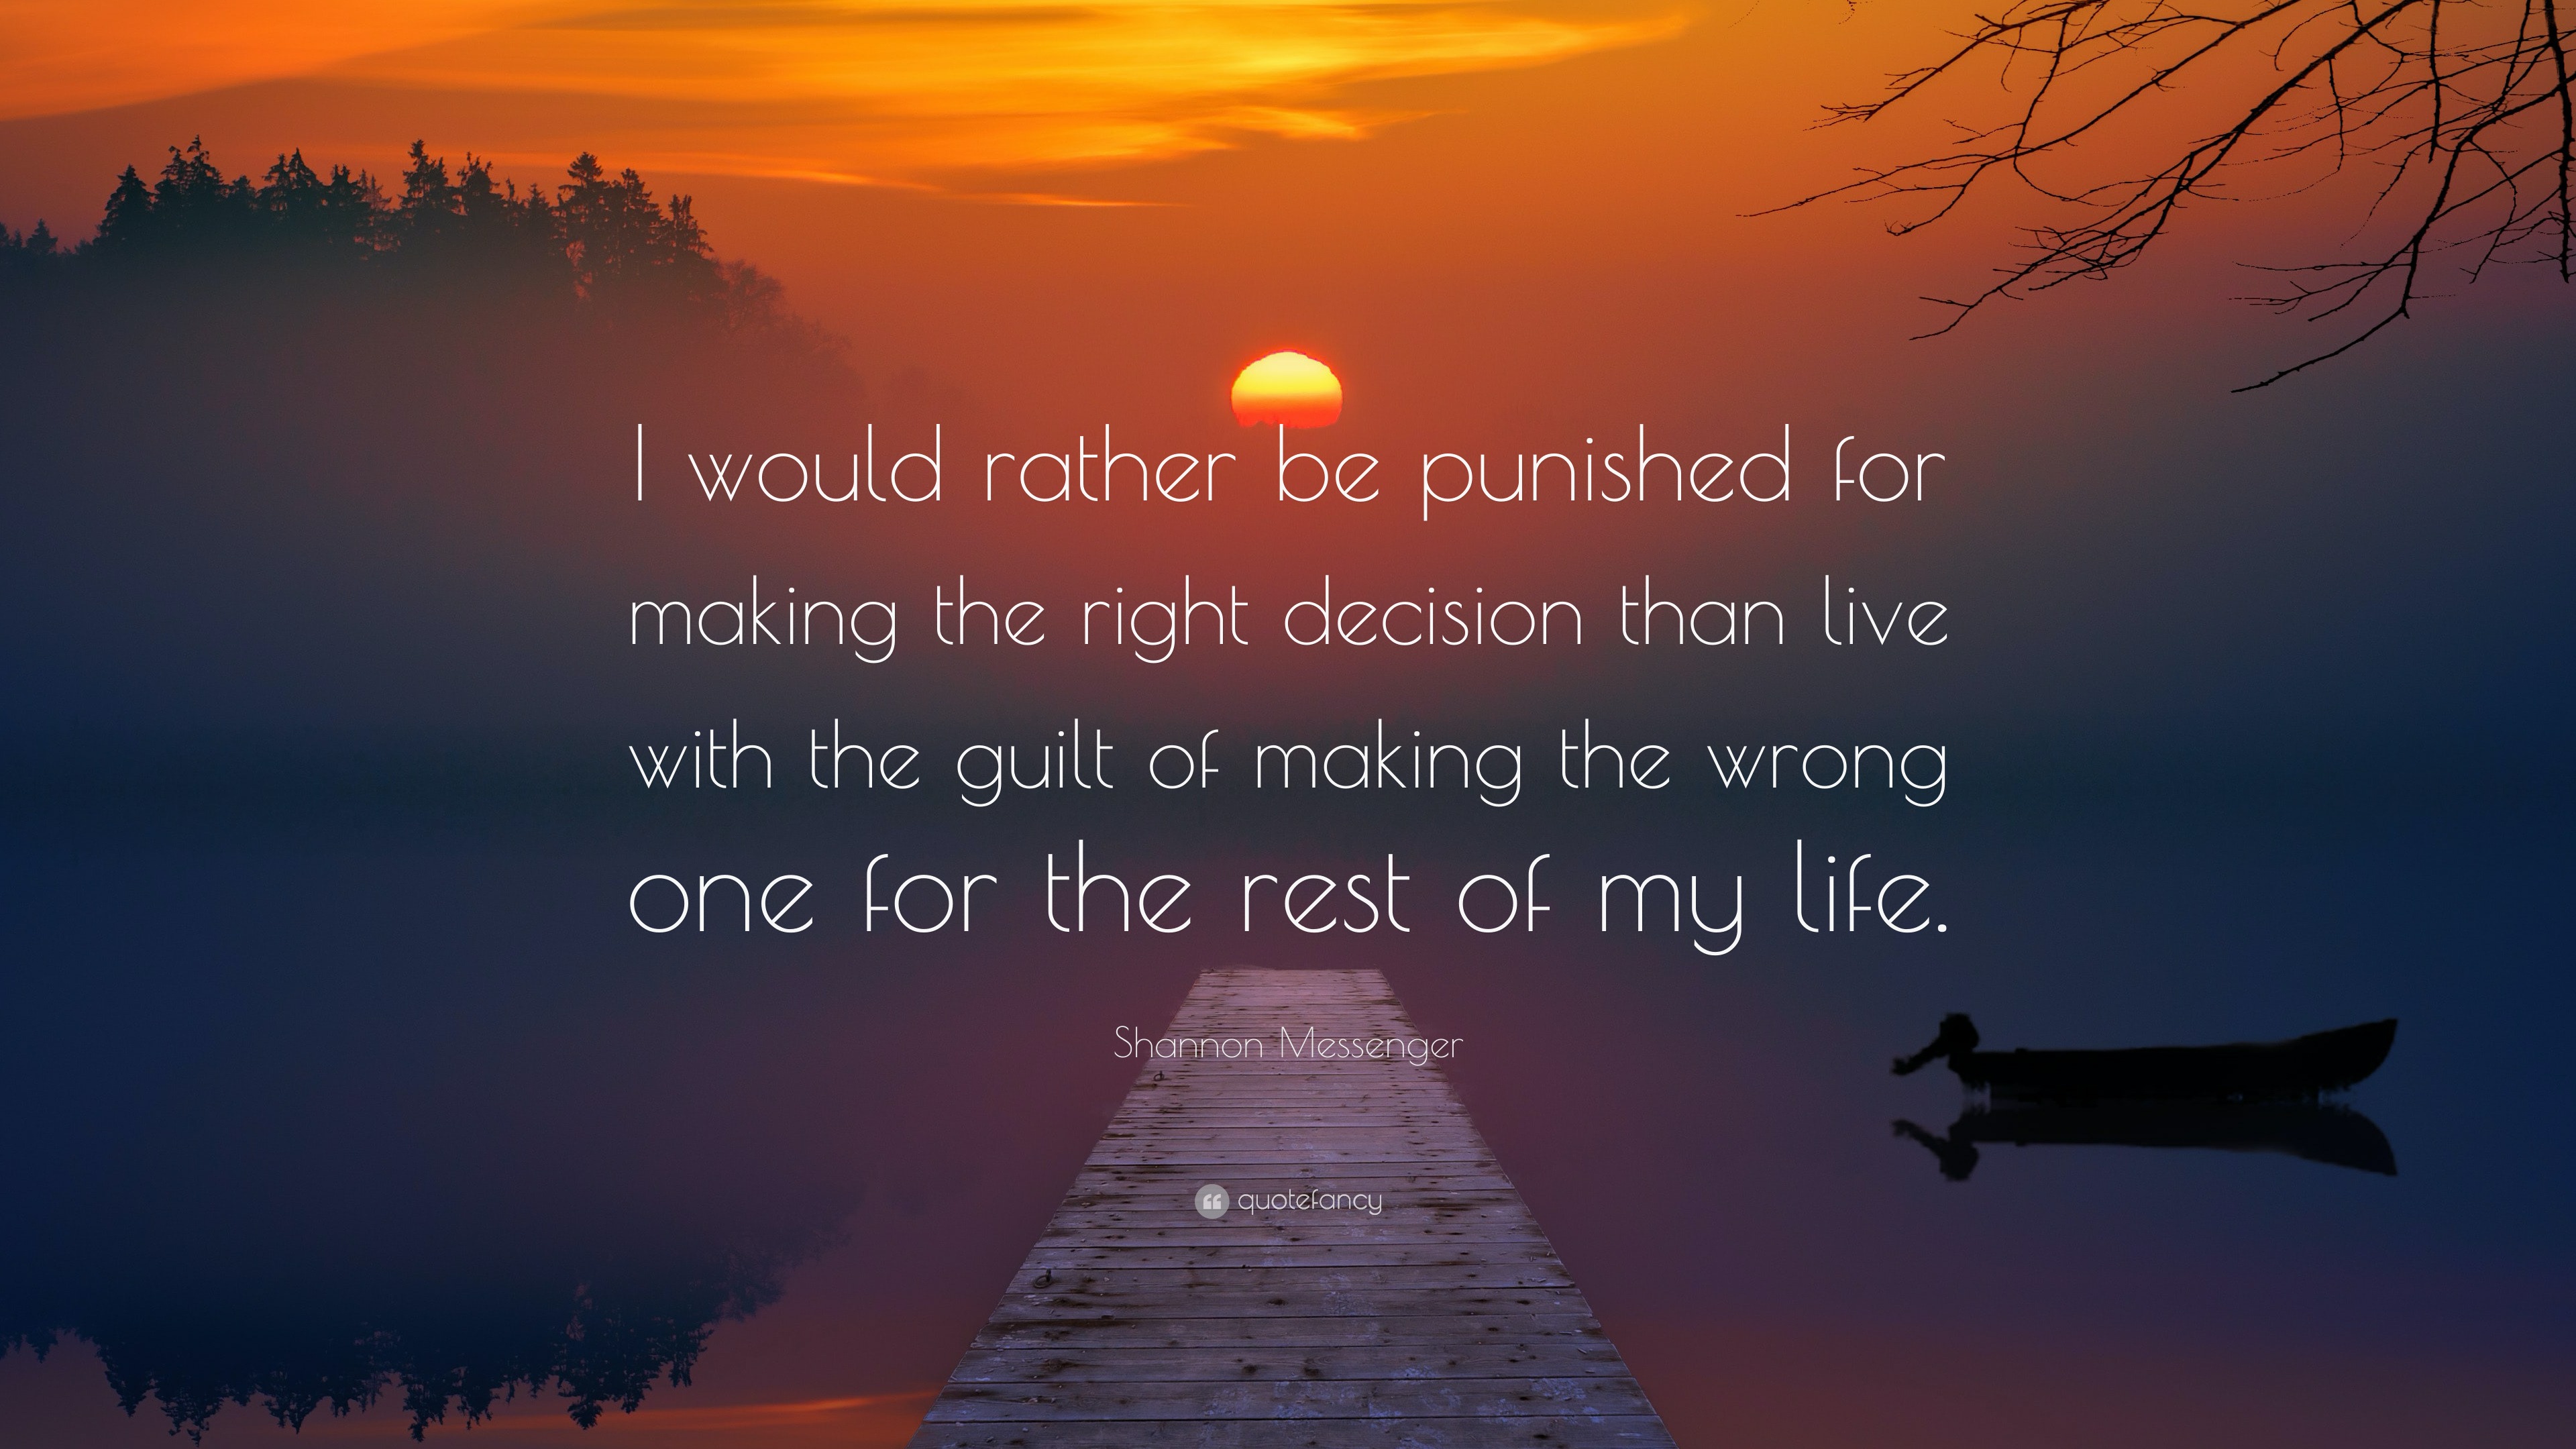 Shannon Messenger Quote: “I would rather be punished for making the